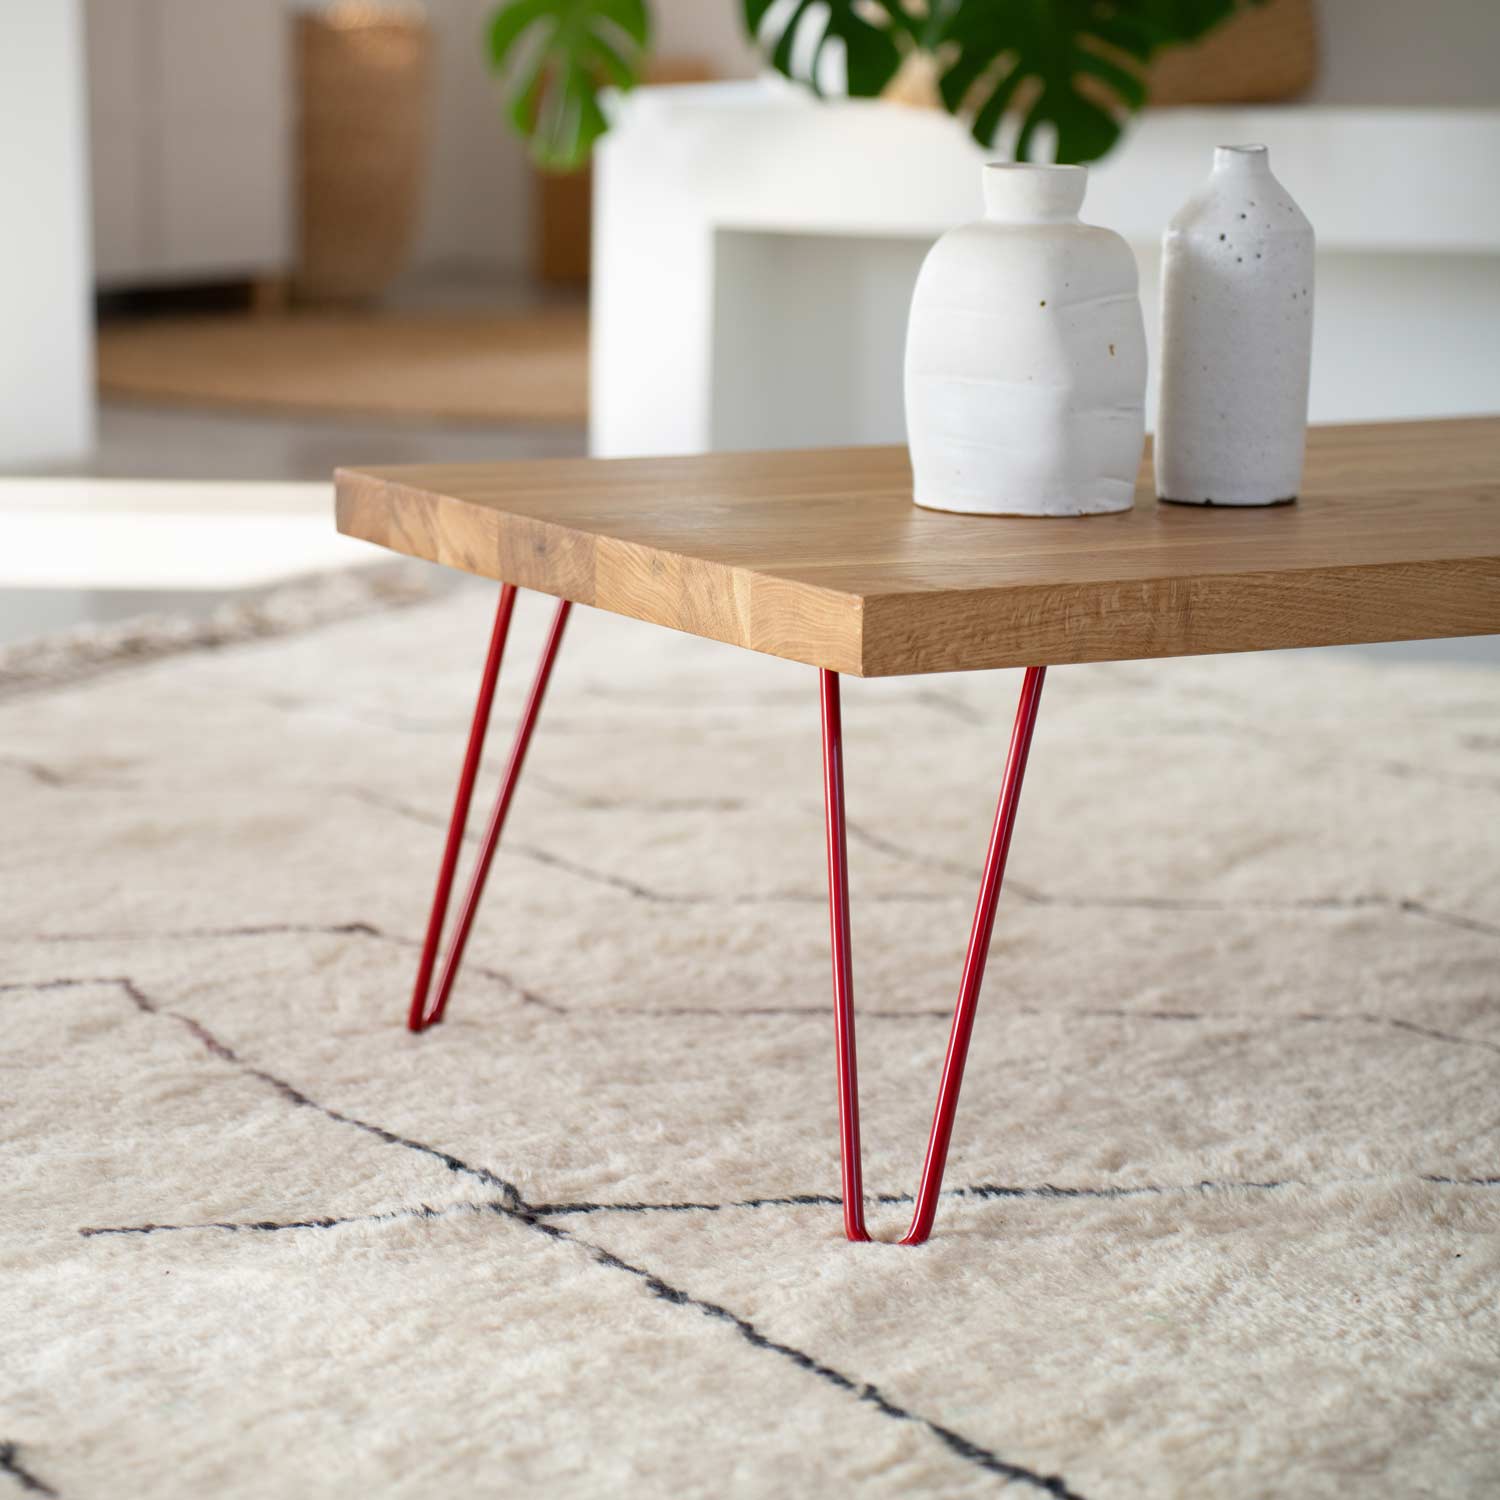 30cm Hairpin Legs - Low Coffee Table